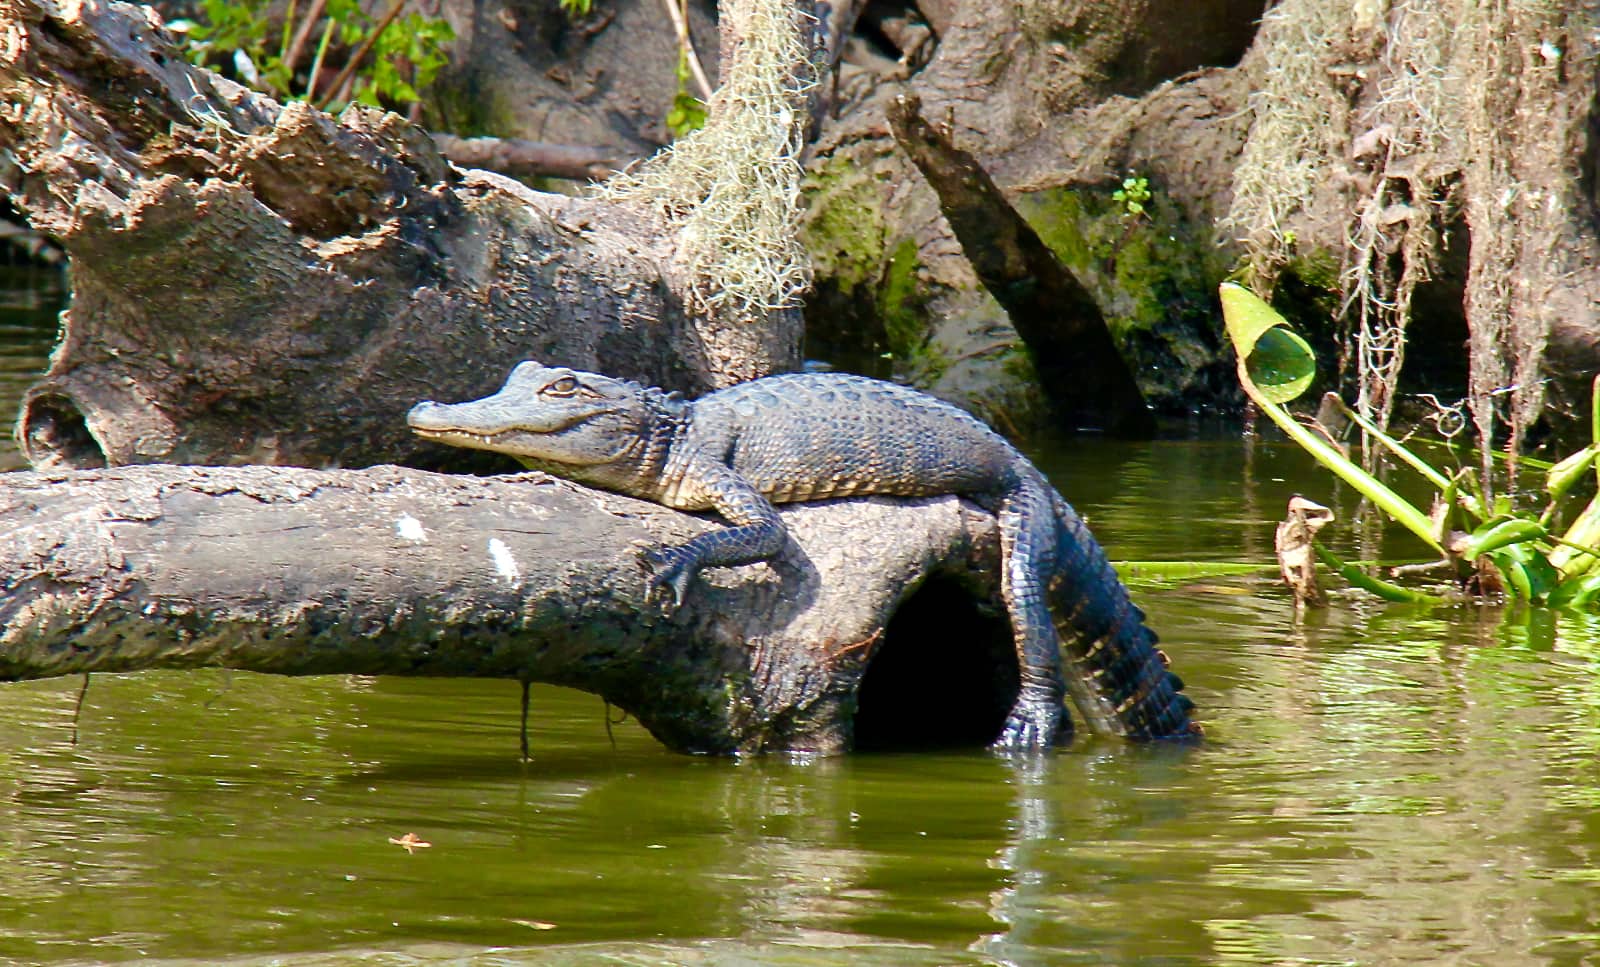 Small alligator laying on log in river